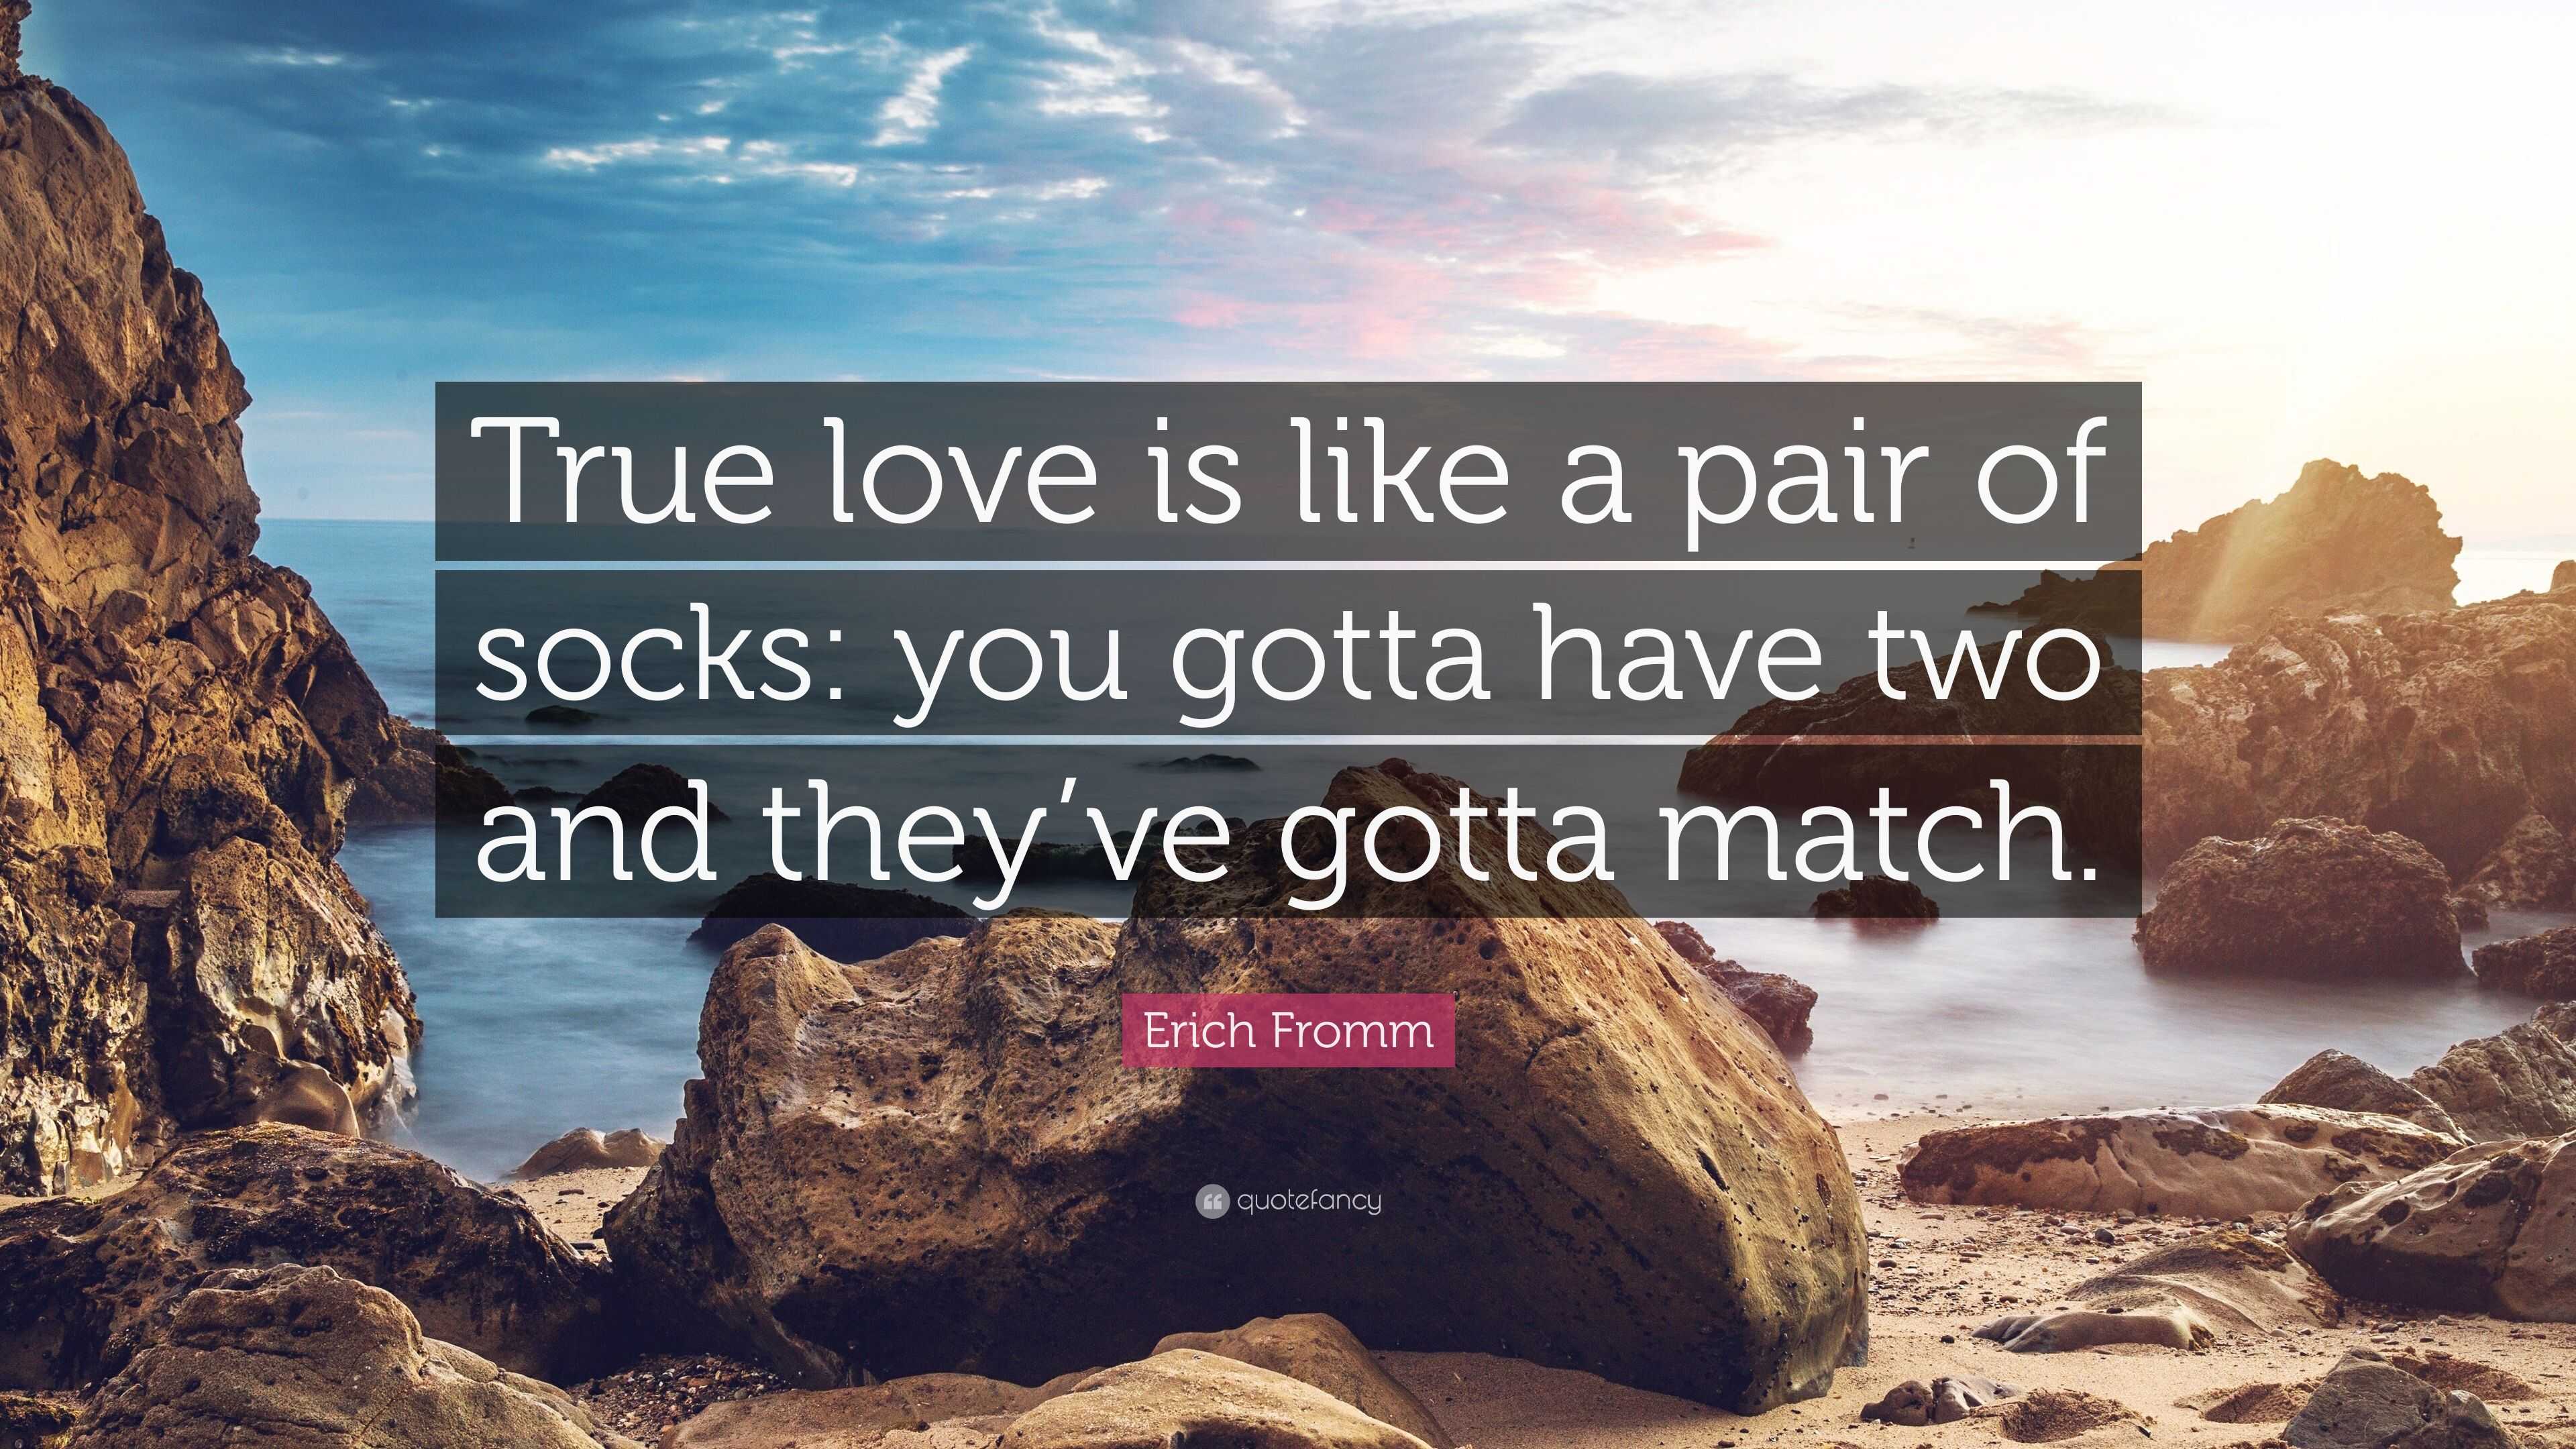 Erich Fromm Quote: “True love is like a pair of socks: you gotta have two  and